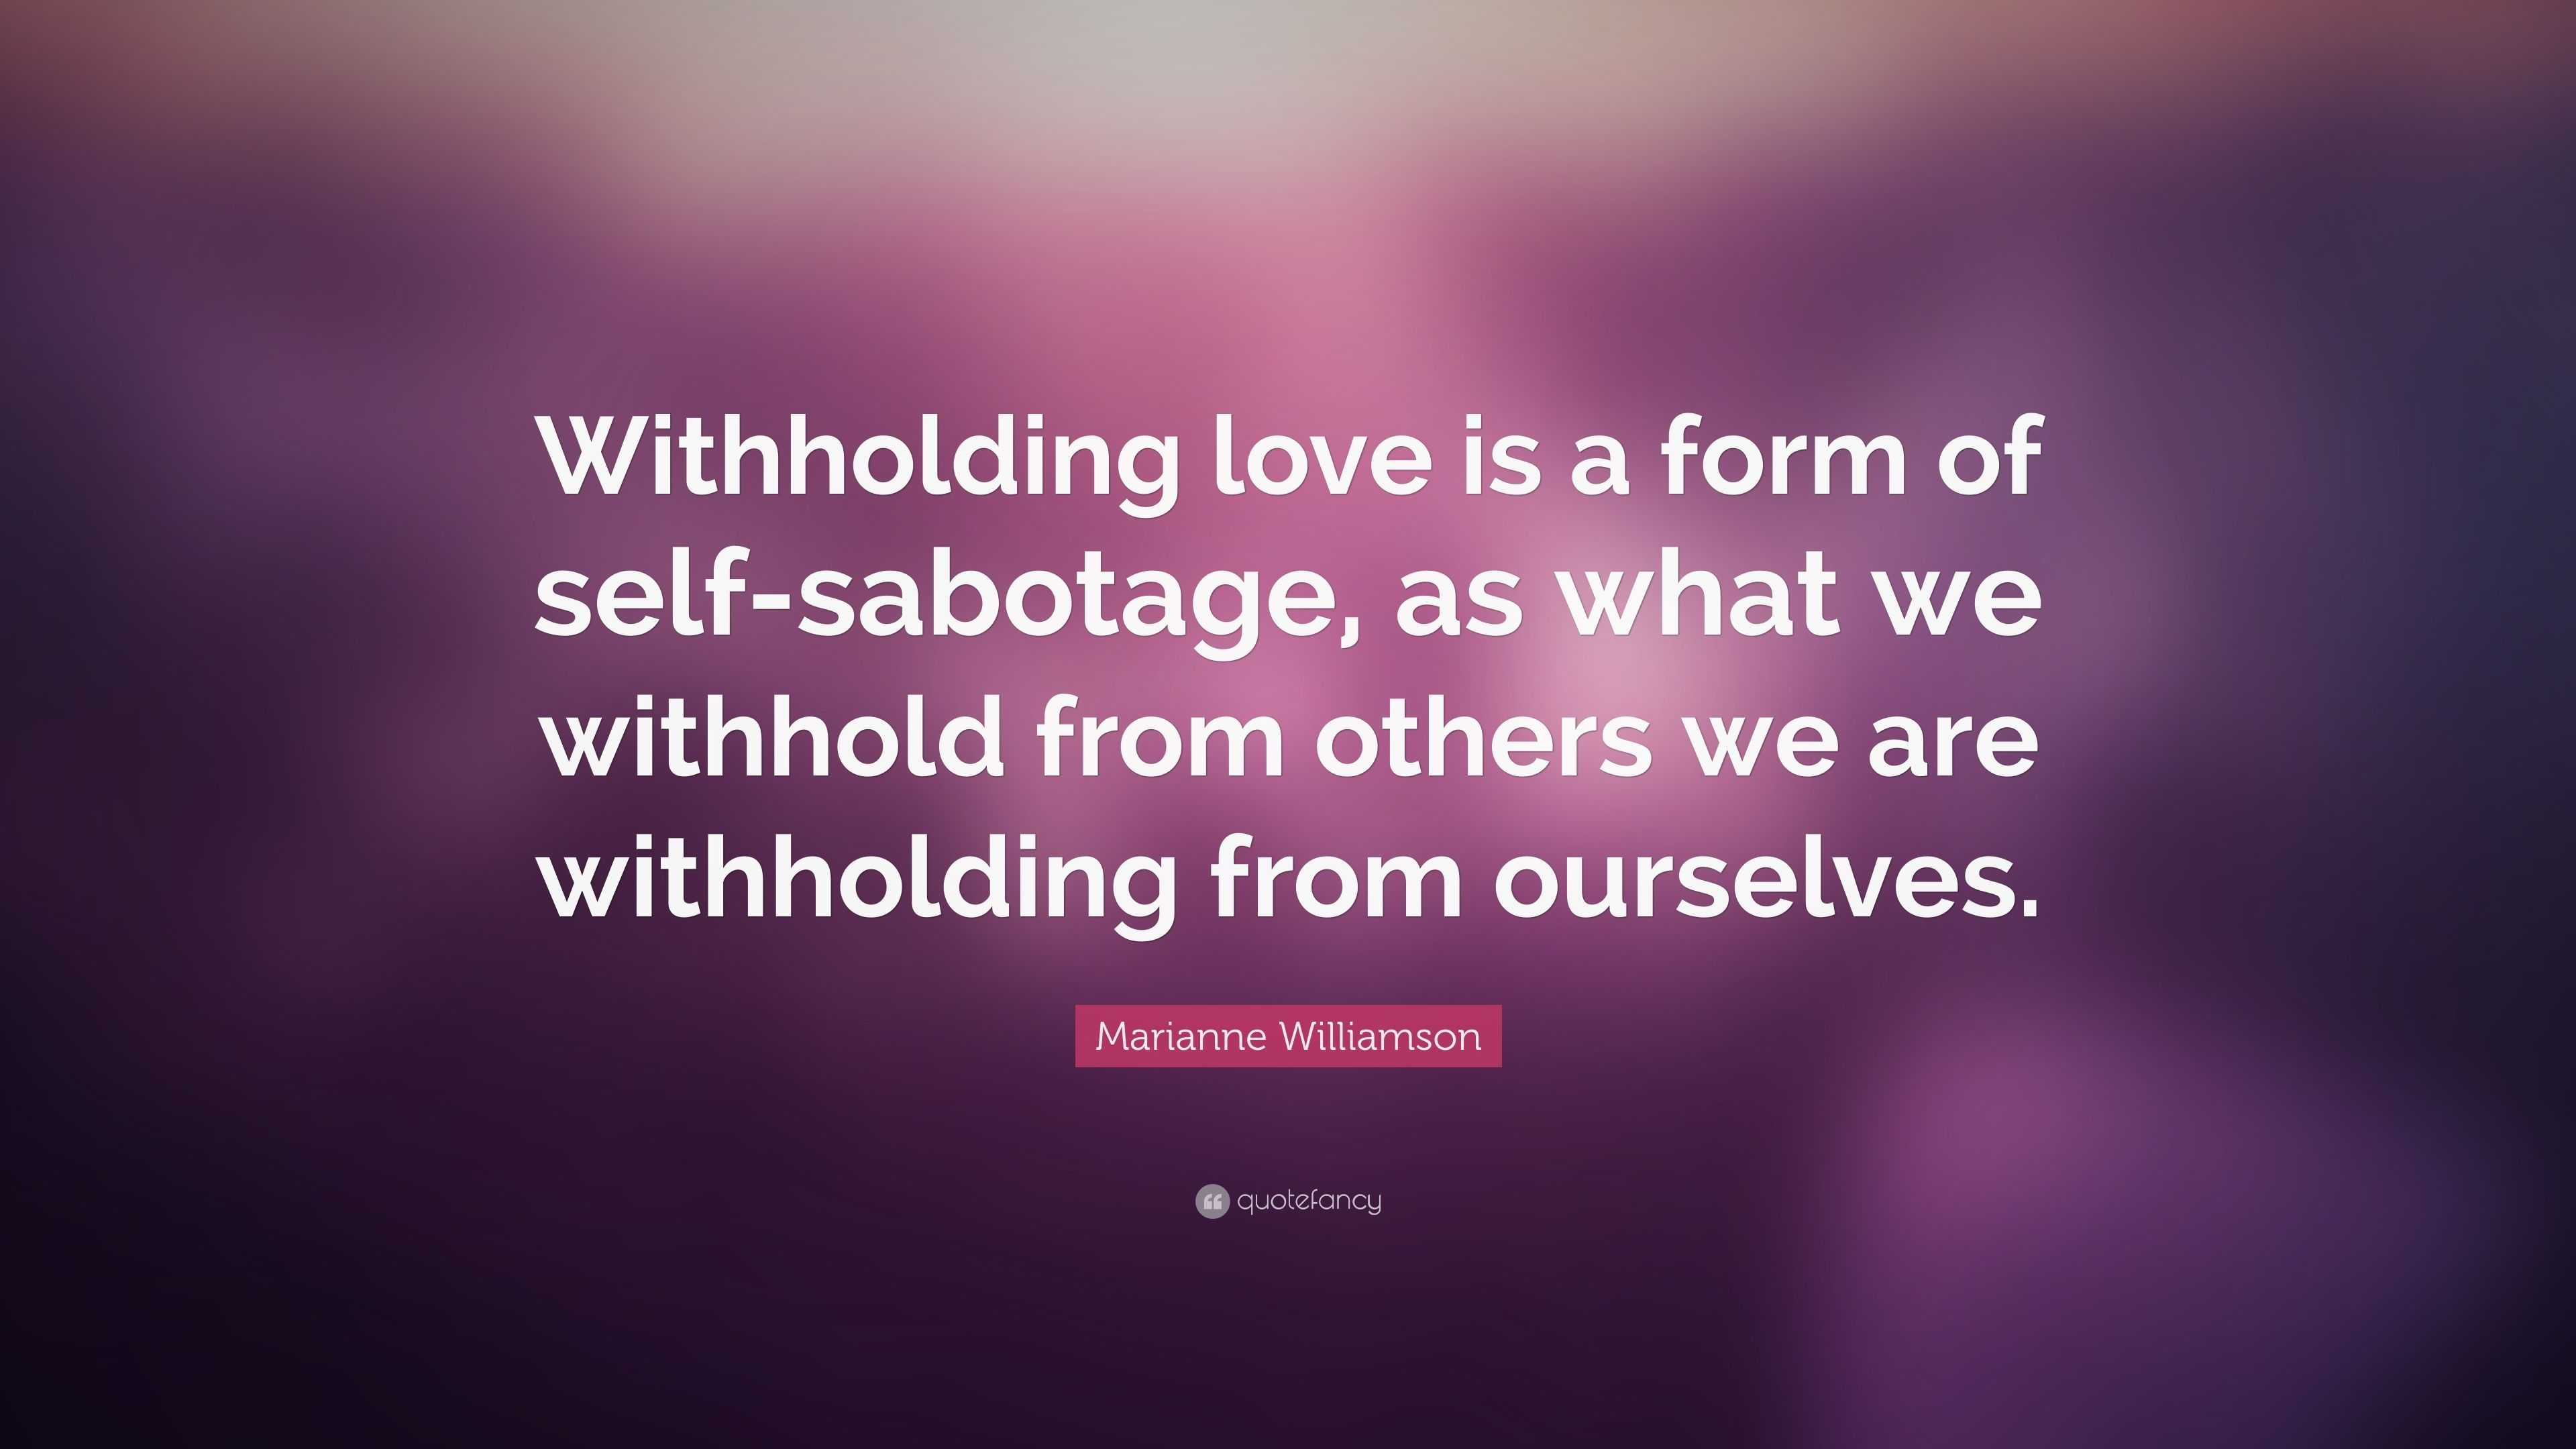 Marianne Williamson Quote Withholding Love Is A Form Of Self Sabotage As What We Withhold From